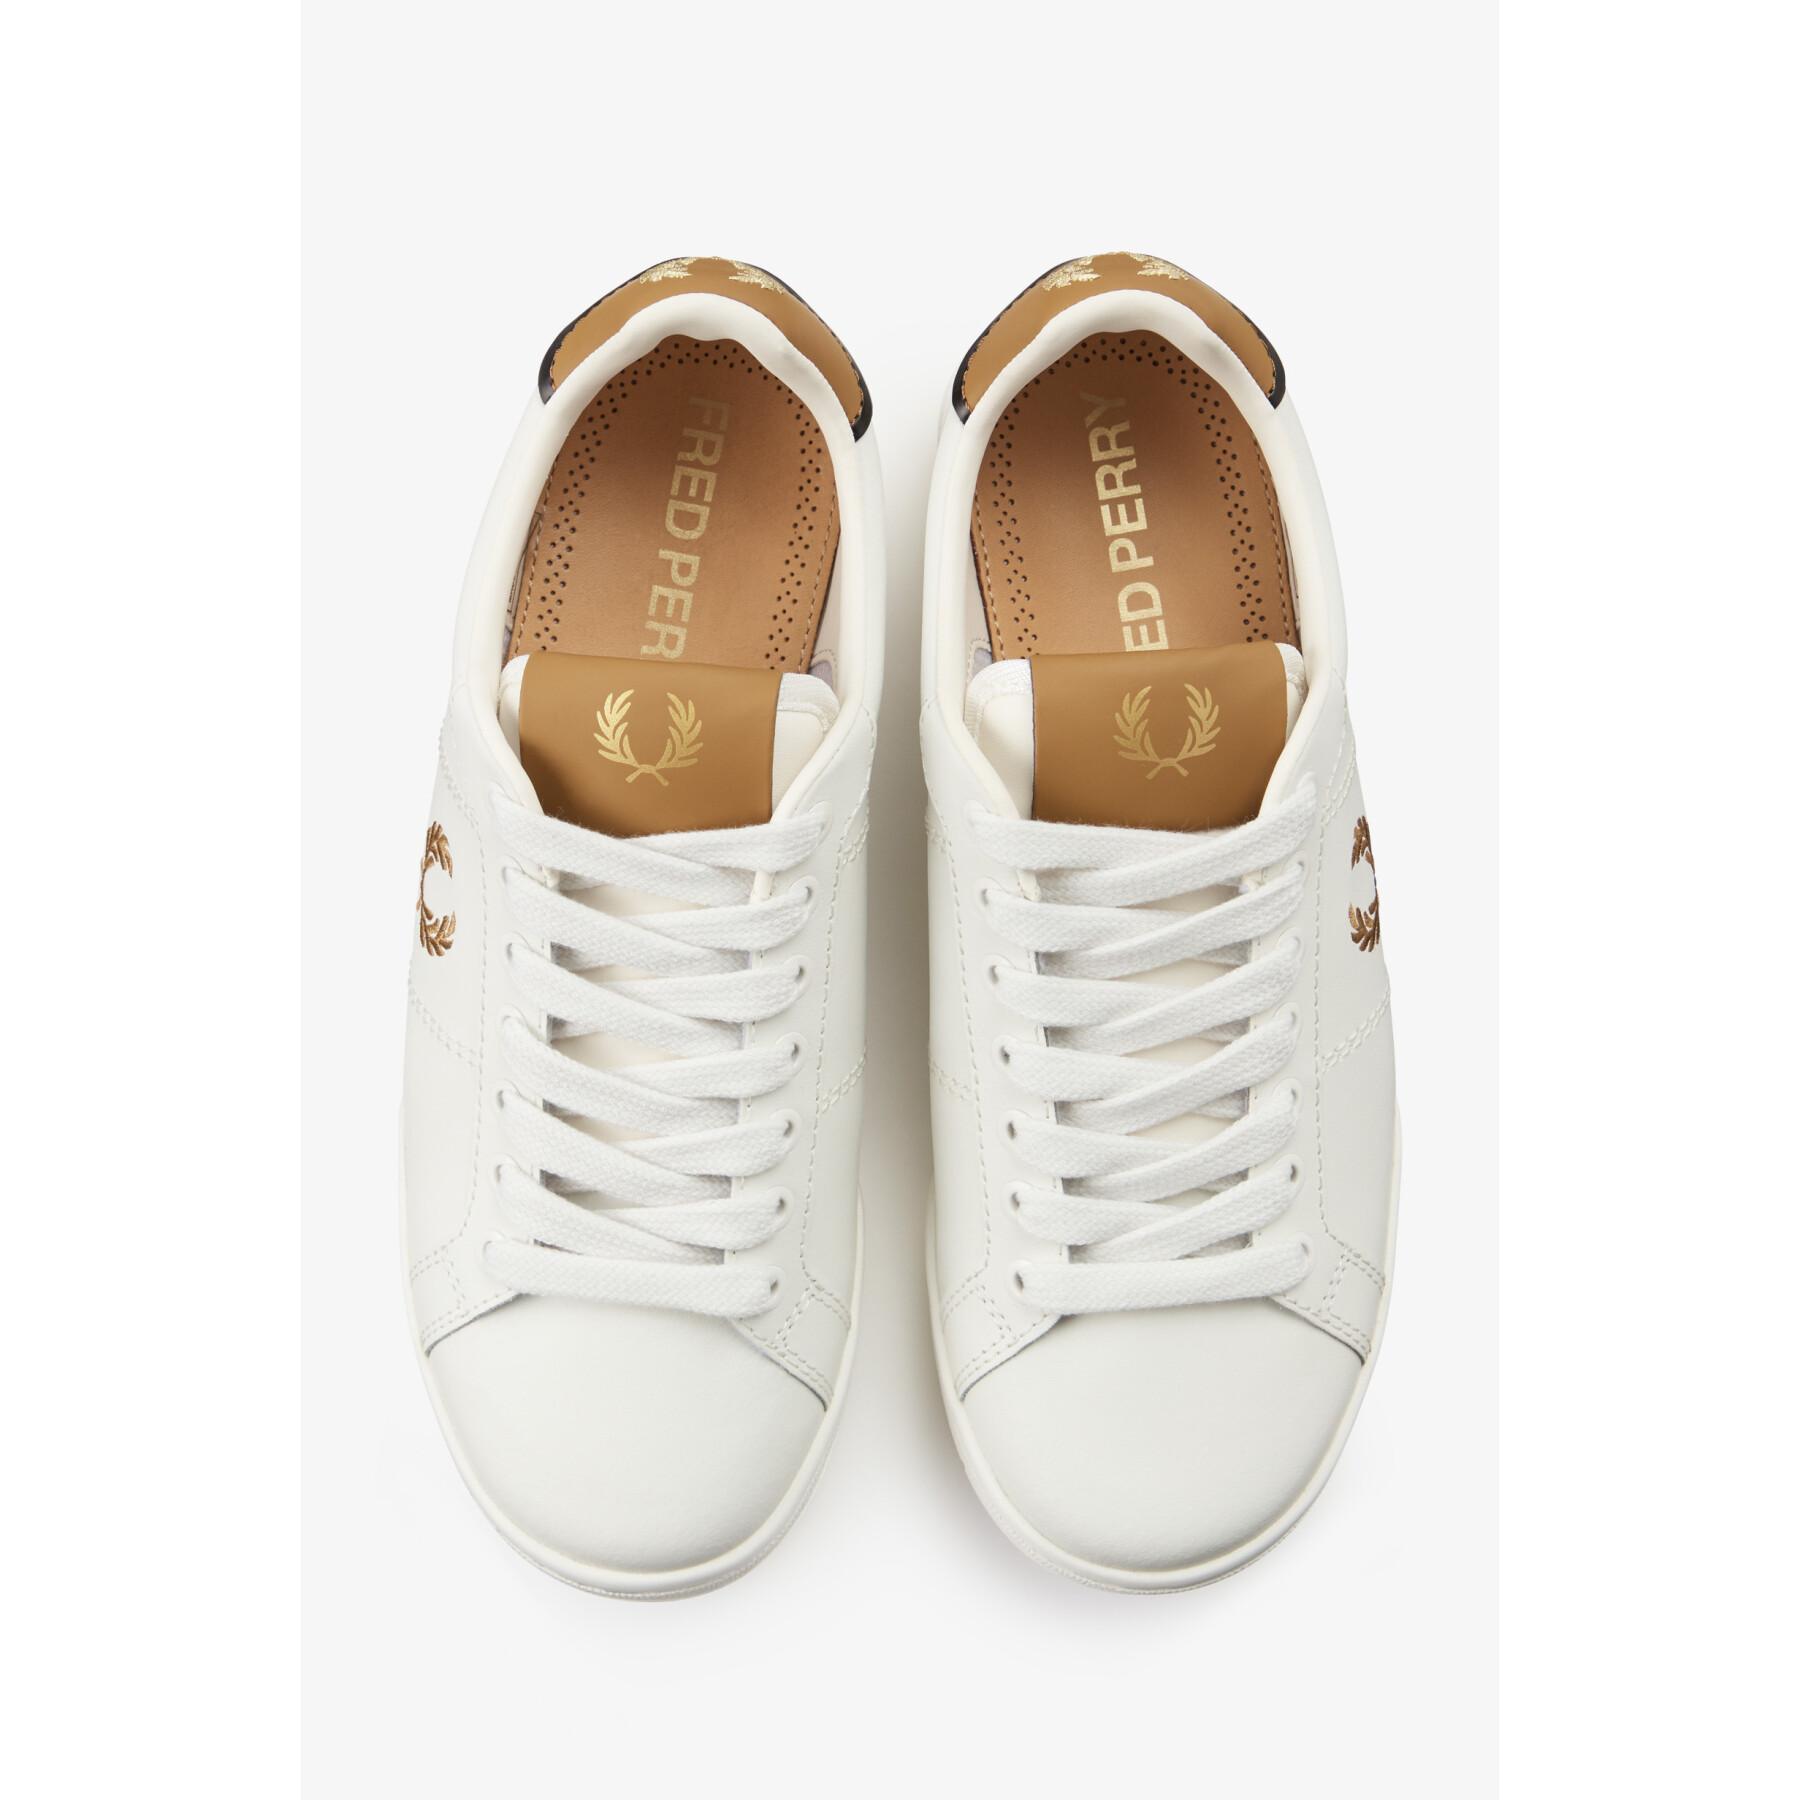 Baskets Fred Perry B722 Leather